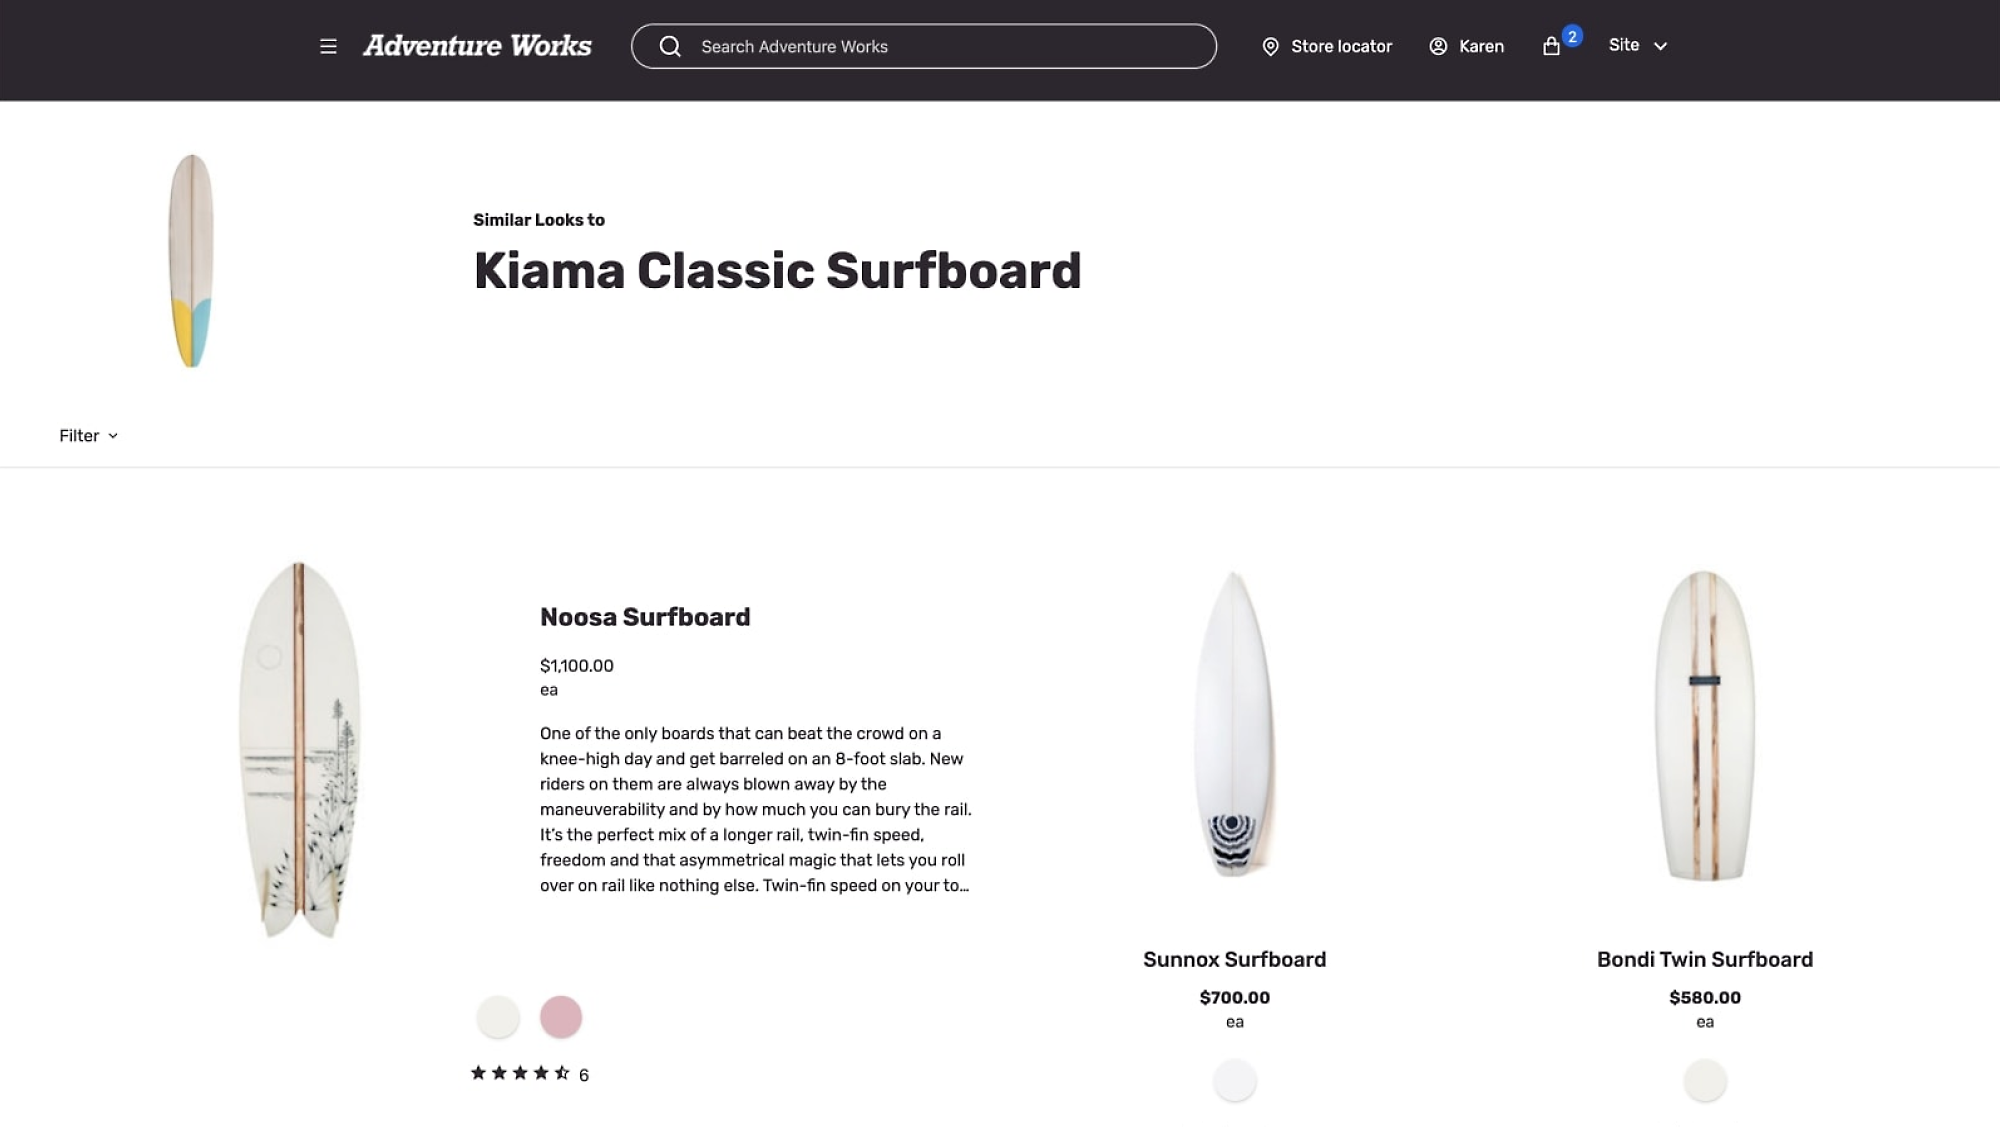 Adventure Works surfboard listings with prices: Kiama Classic, Noosa, Sunnox, and Bondi Twin Surfboards